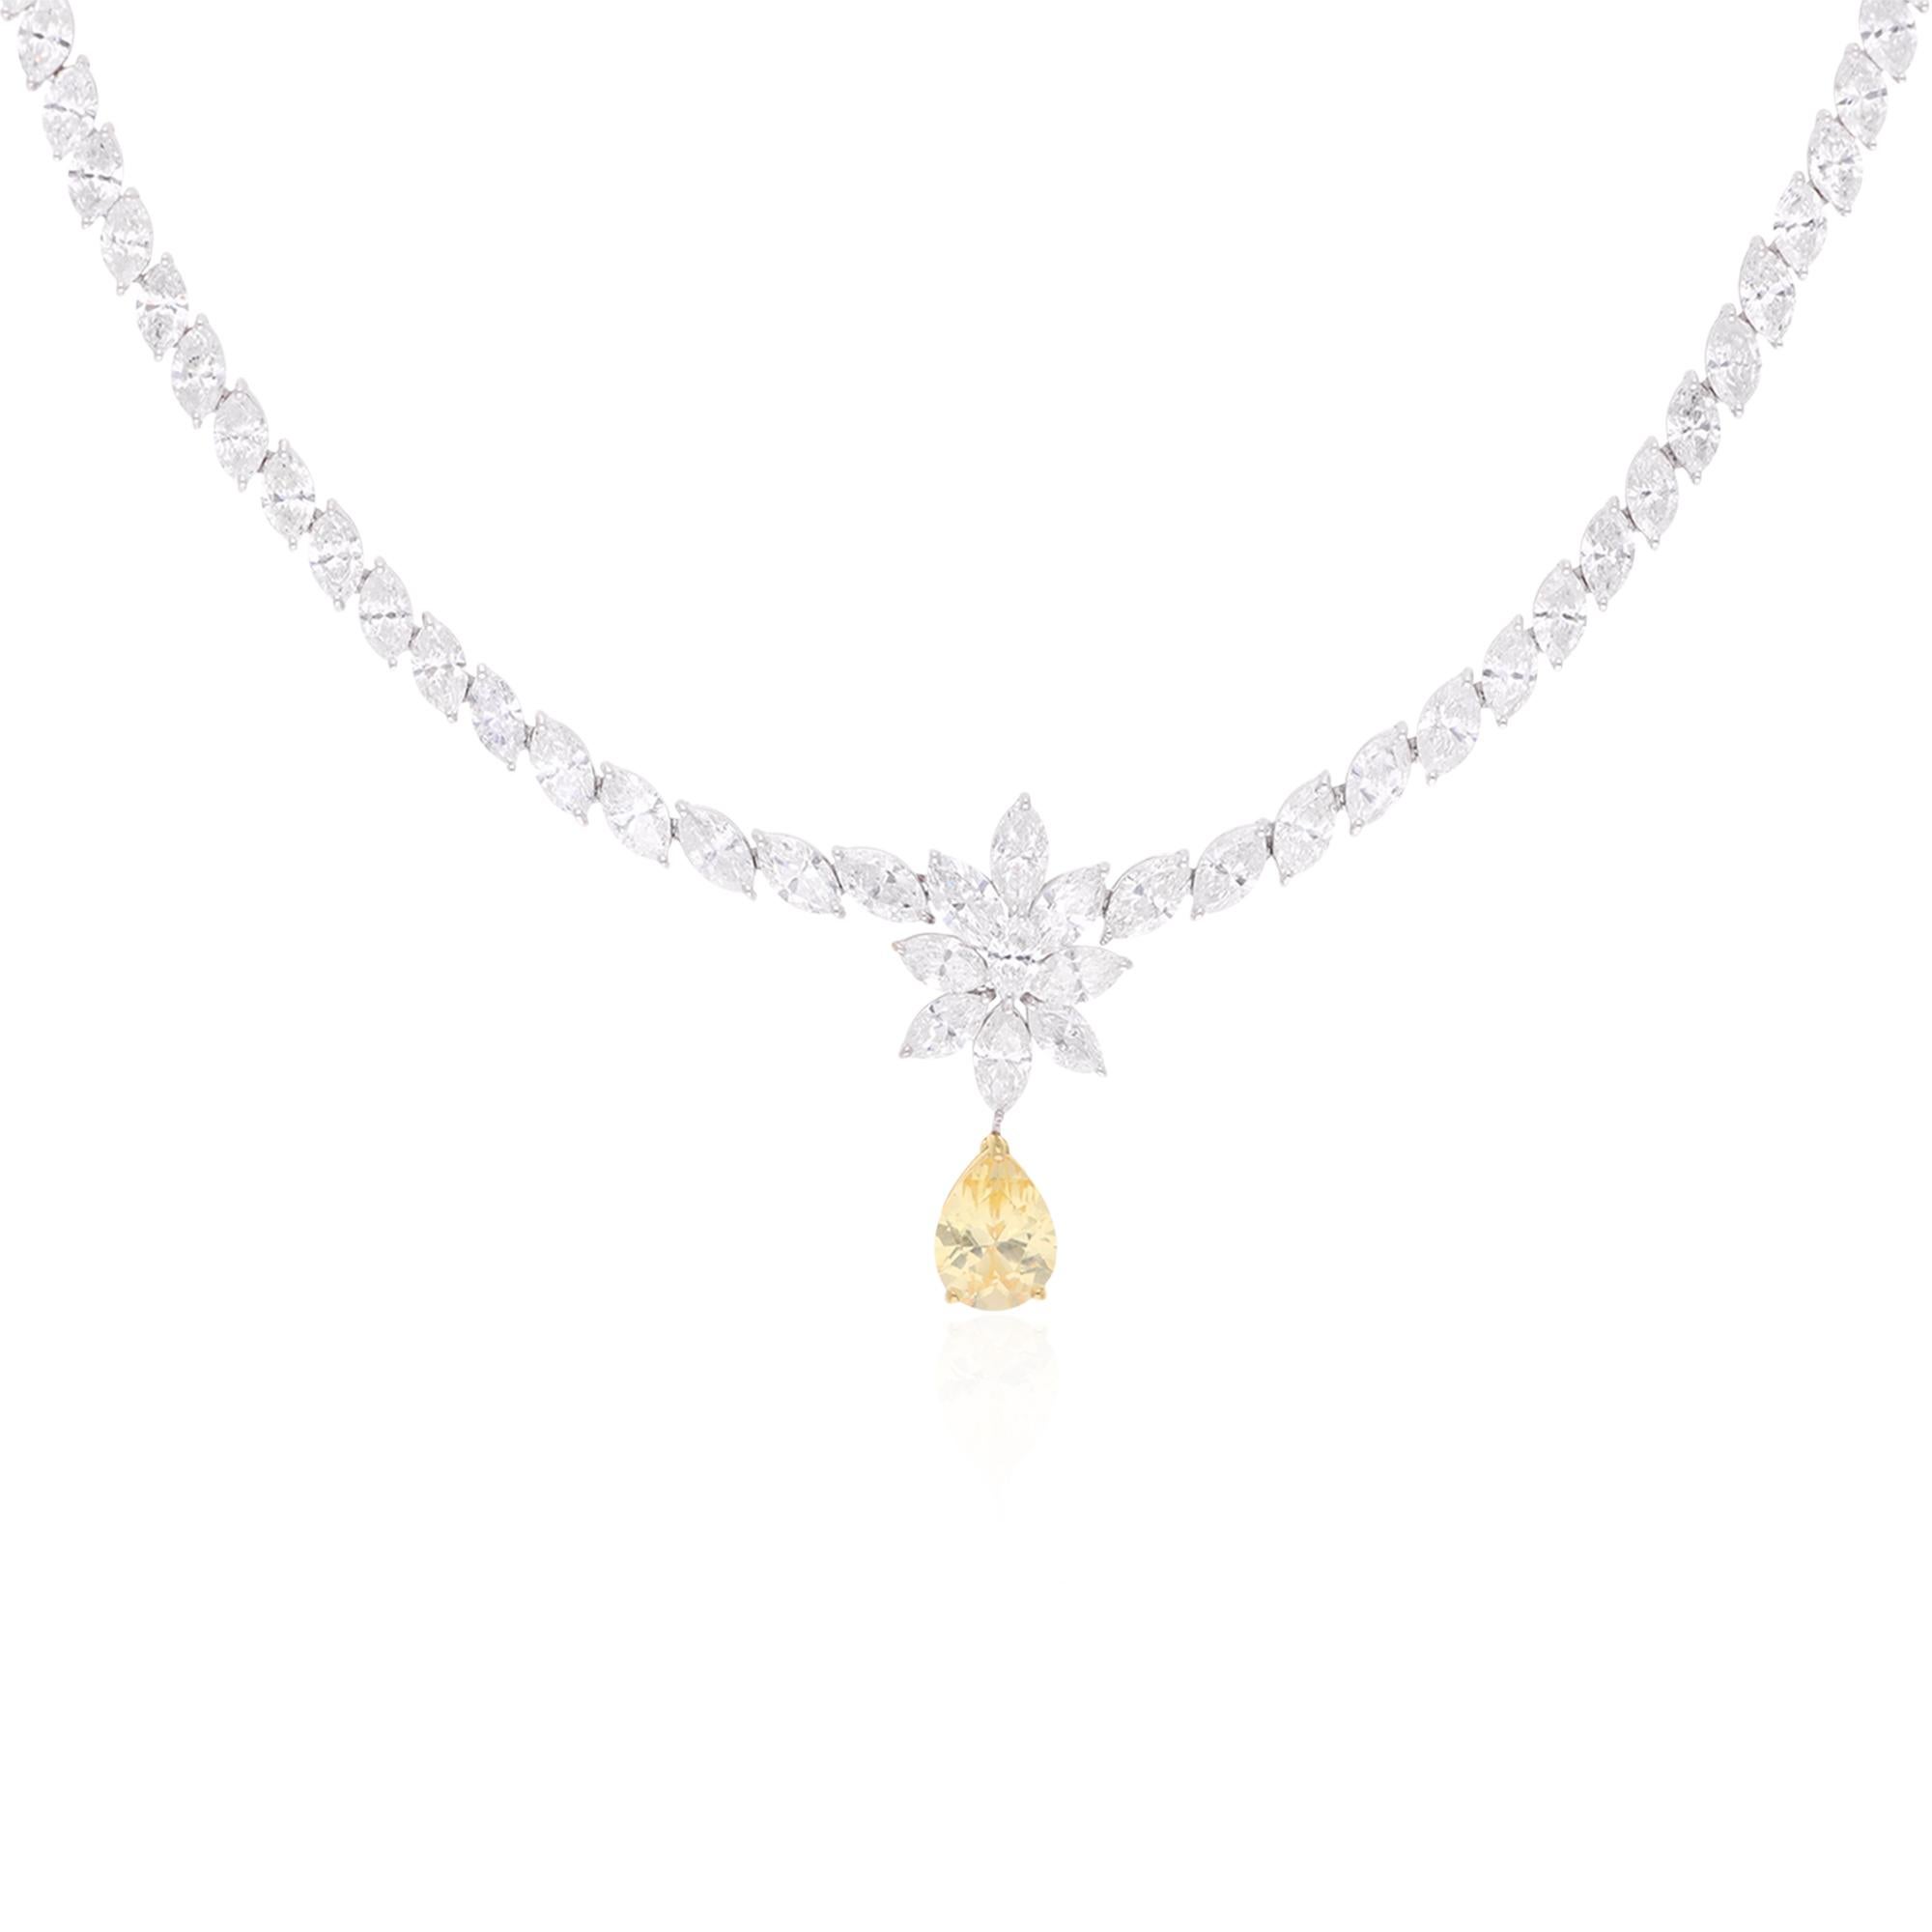 At the heart of the necklace hangs a stunning pear-shaped gemstone, chosen for its captivating color and brilliance. Whether it be a lustrous pearl, a vibrant sapphire, or a captivating emerald, the gemstone serves as the focal point of the